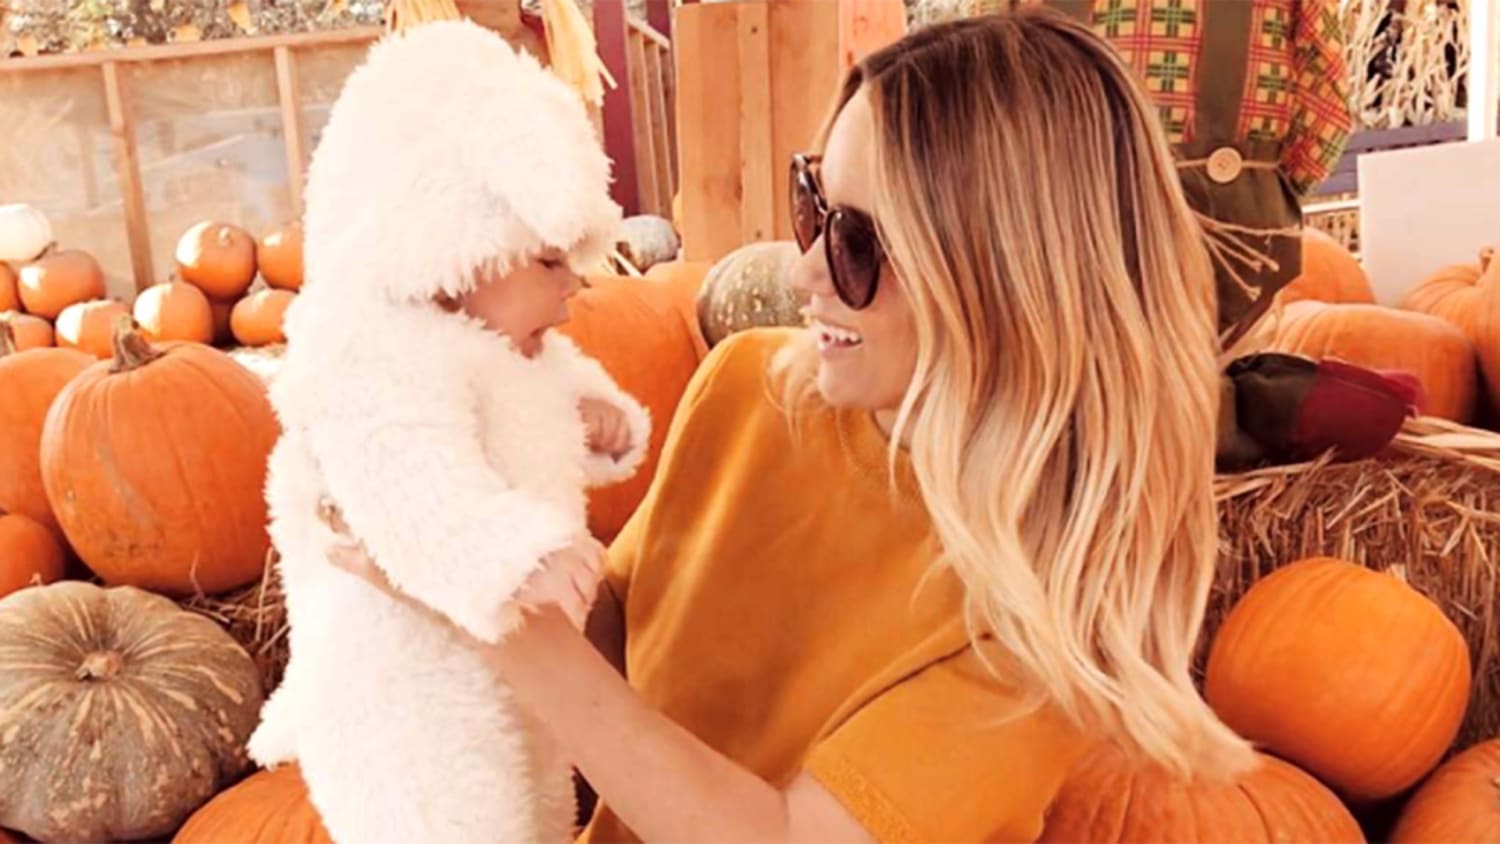 Lauren Conrad's 3-month-old son dressed up as a lamb is the cutest